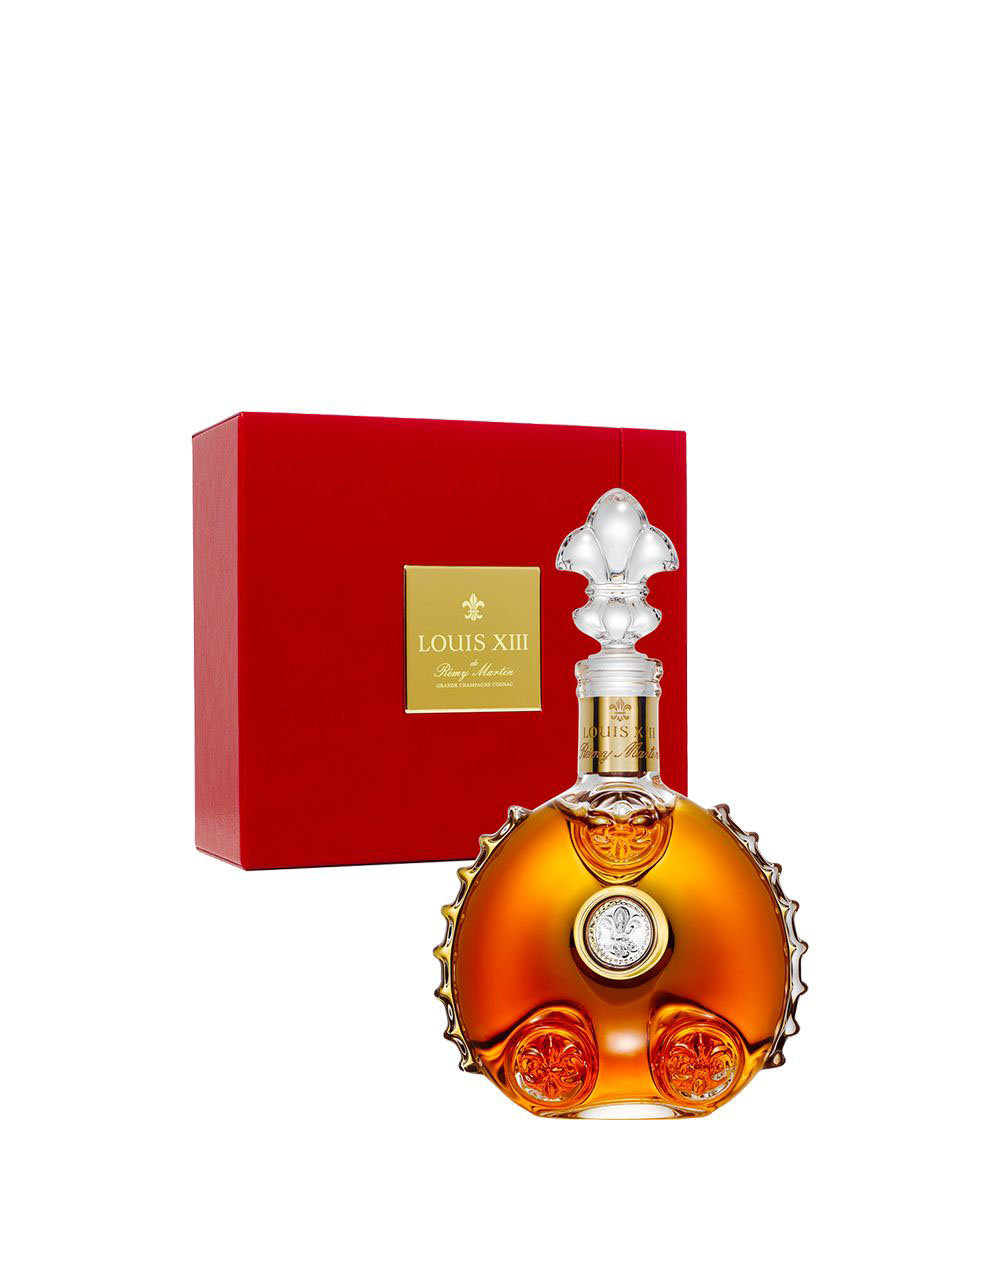 A Baccarat Remy Martin Louis XIII Grande Champagne Cognac Crystal